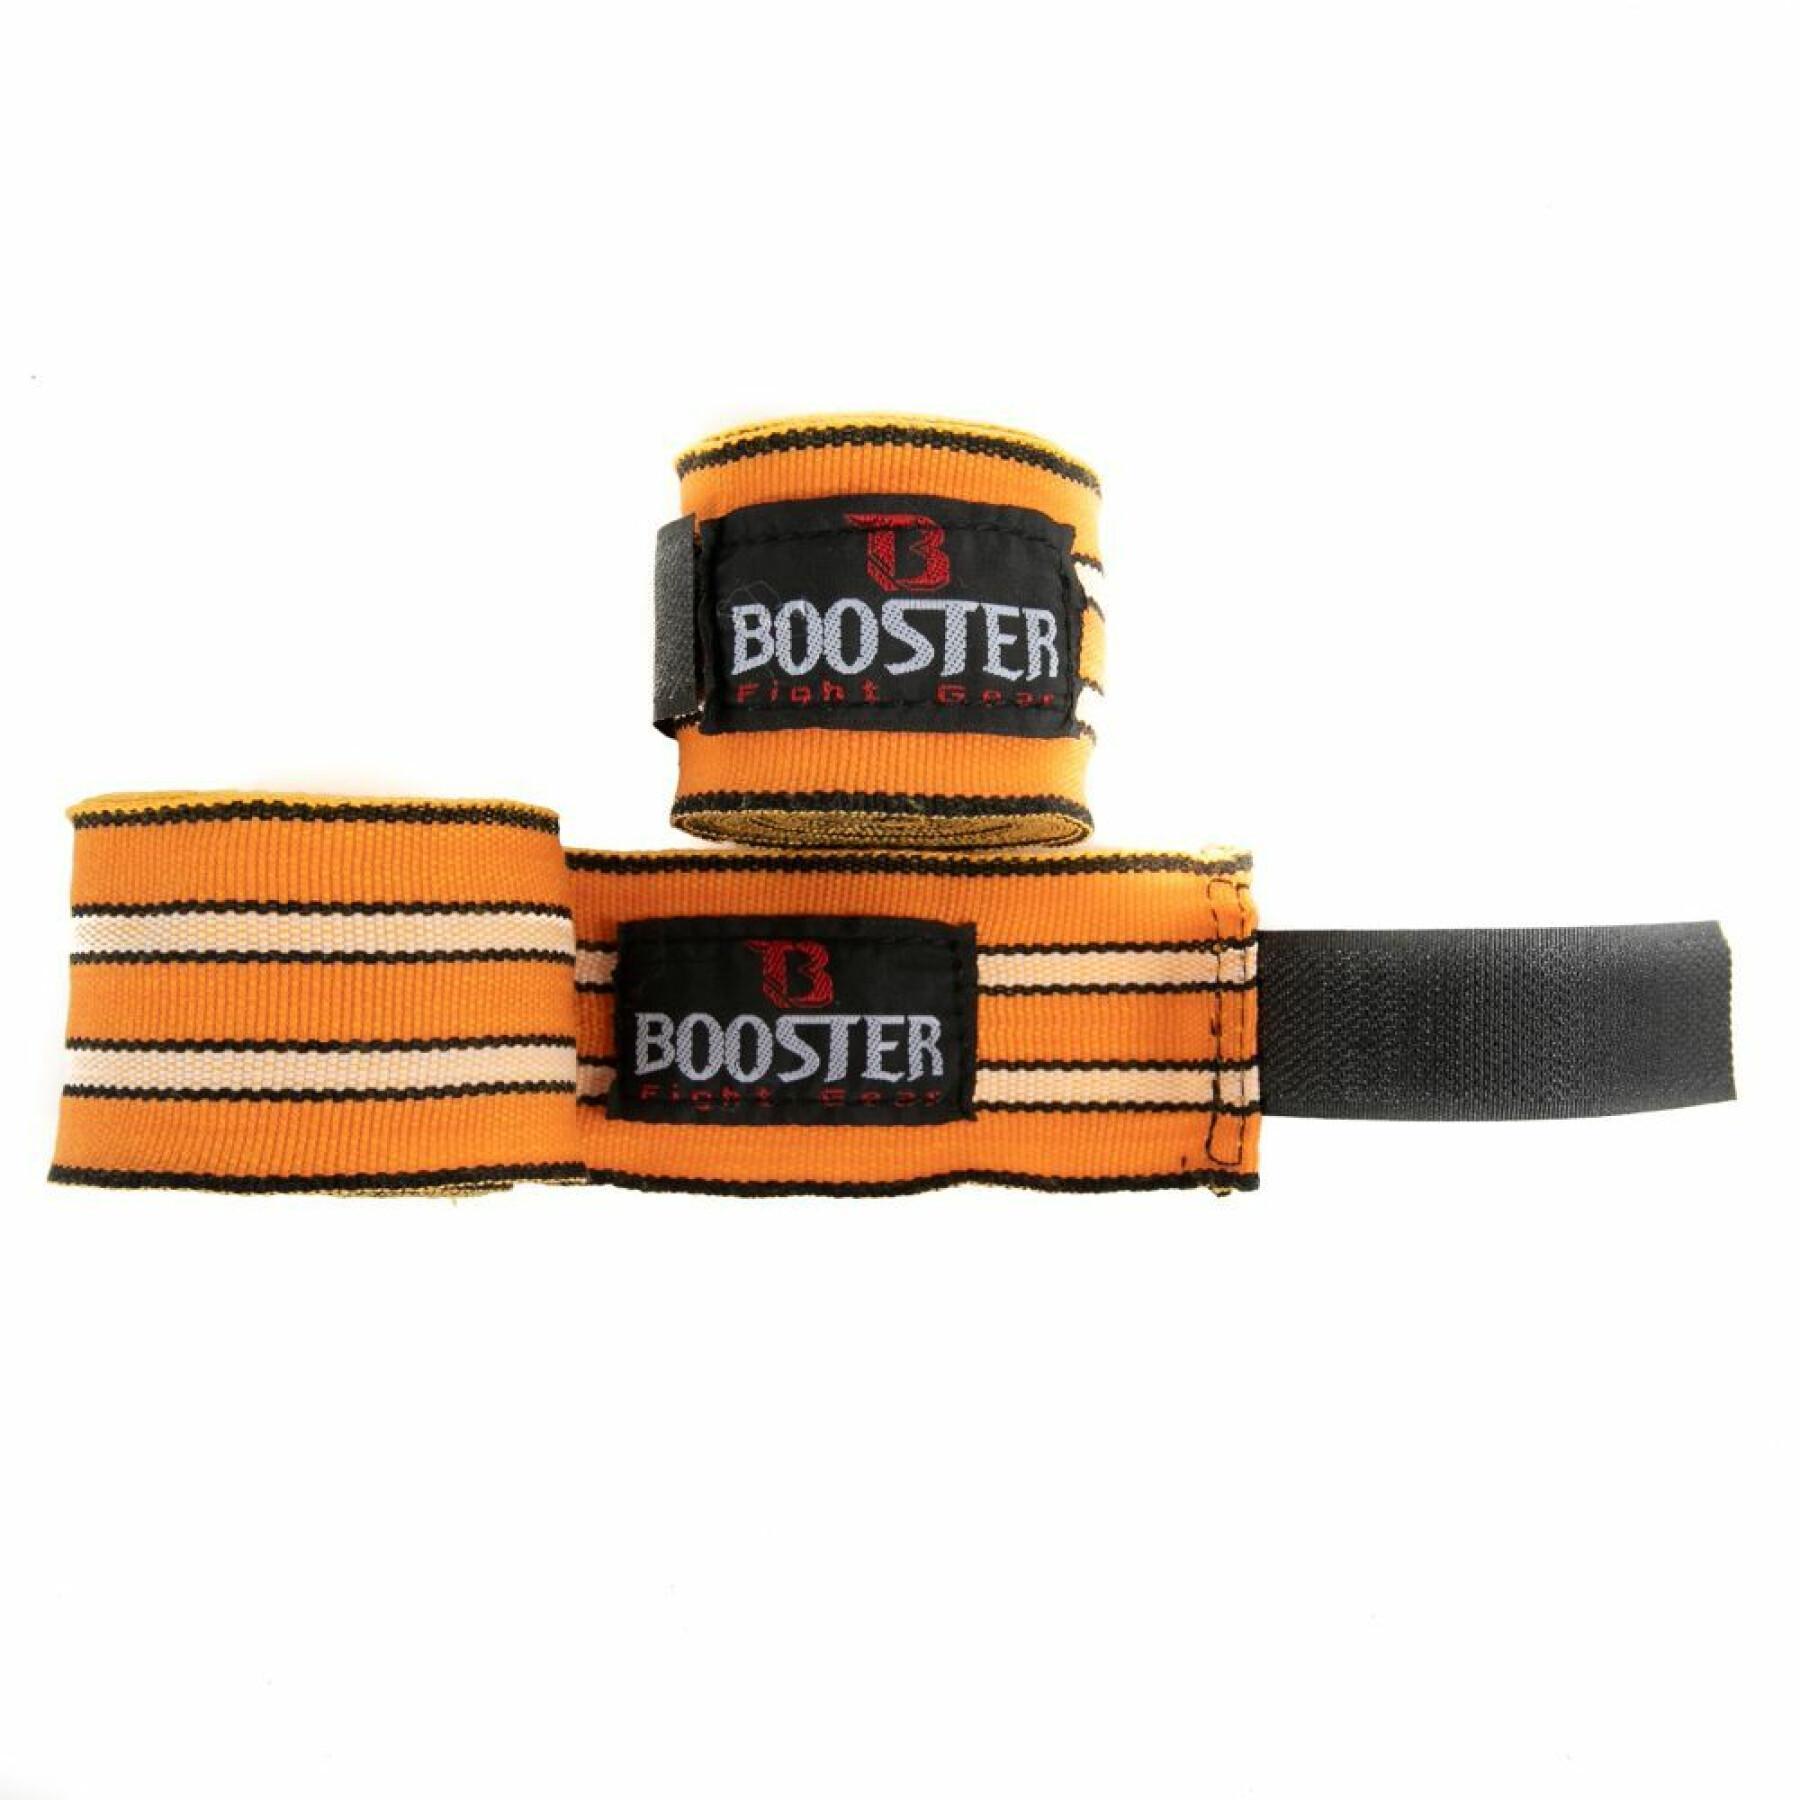 Boxing Bands Booster Fight Gear Bpc Retro 7